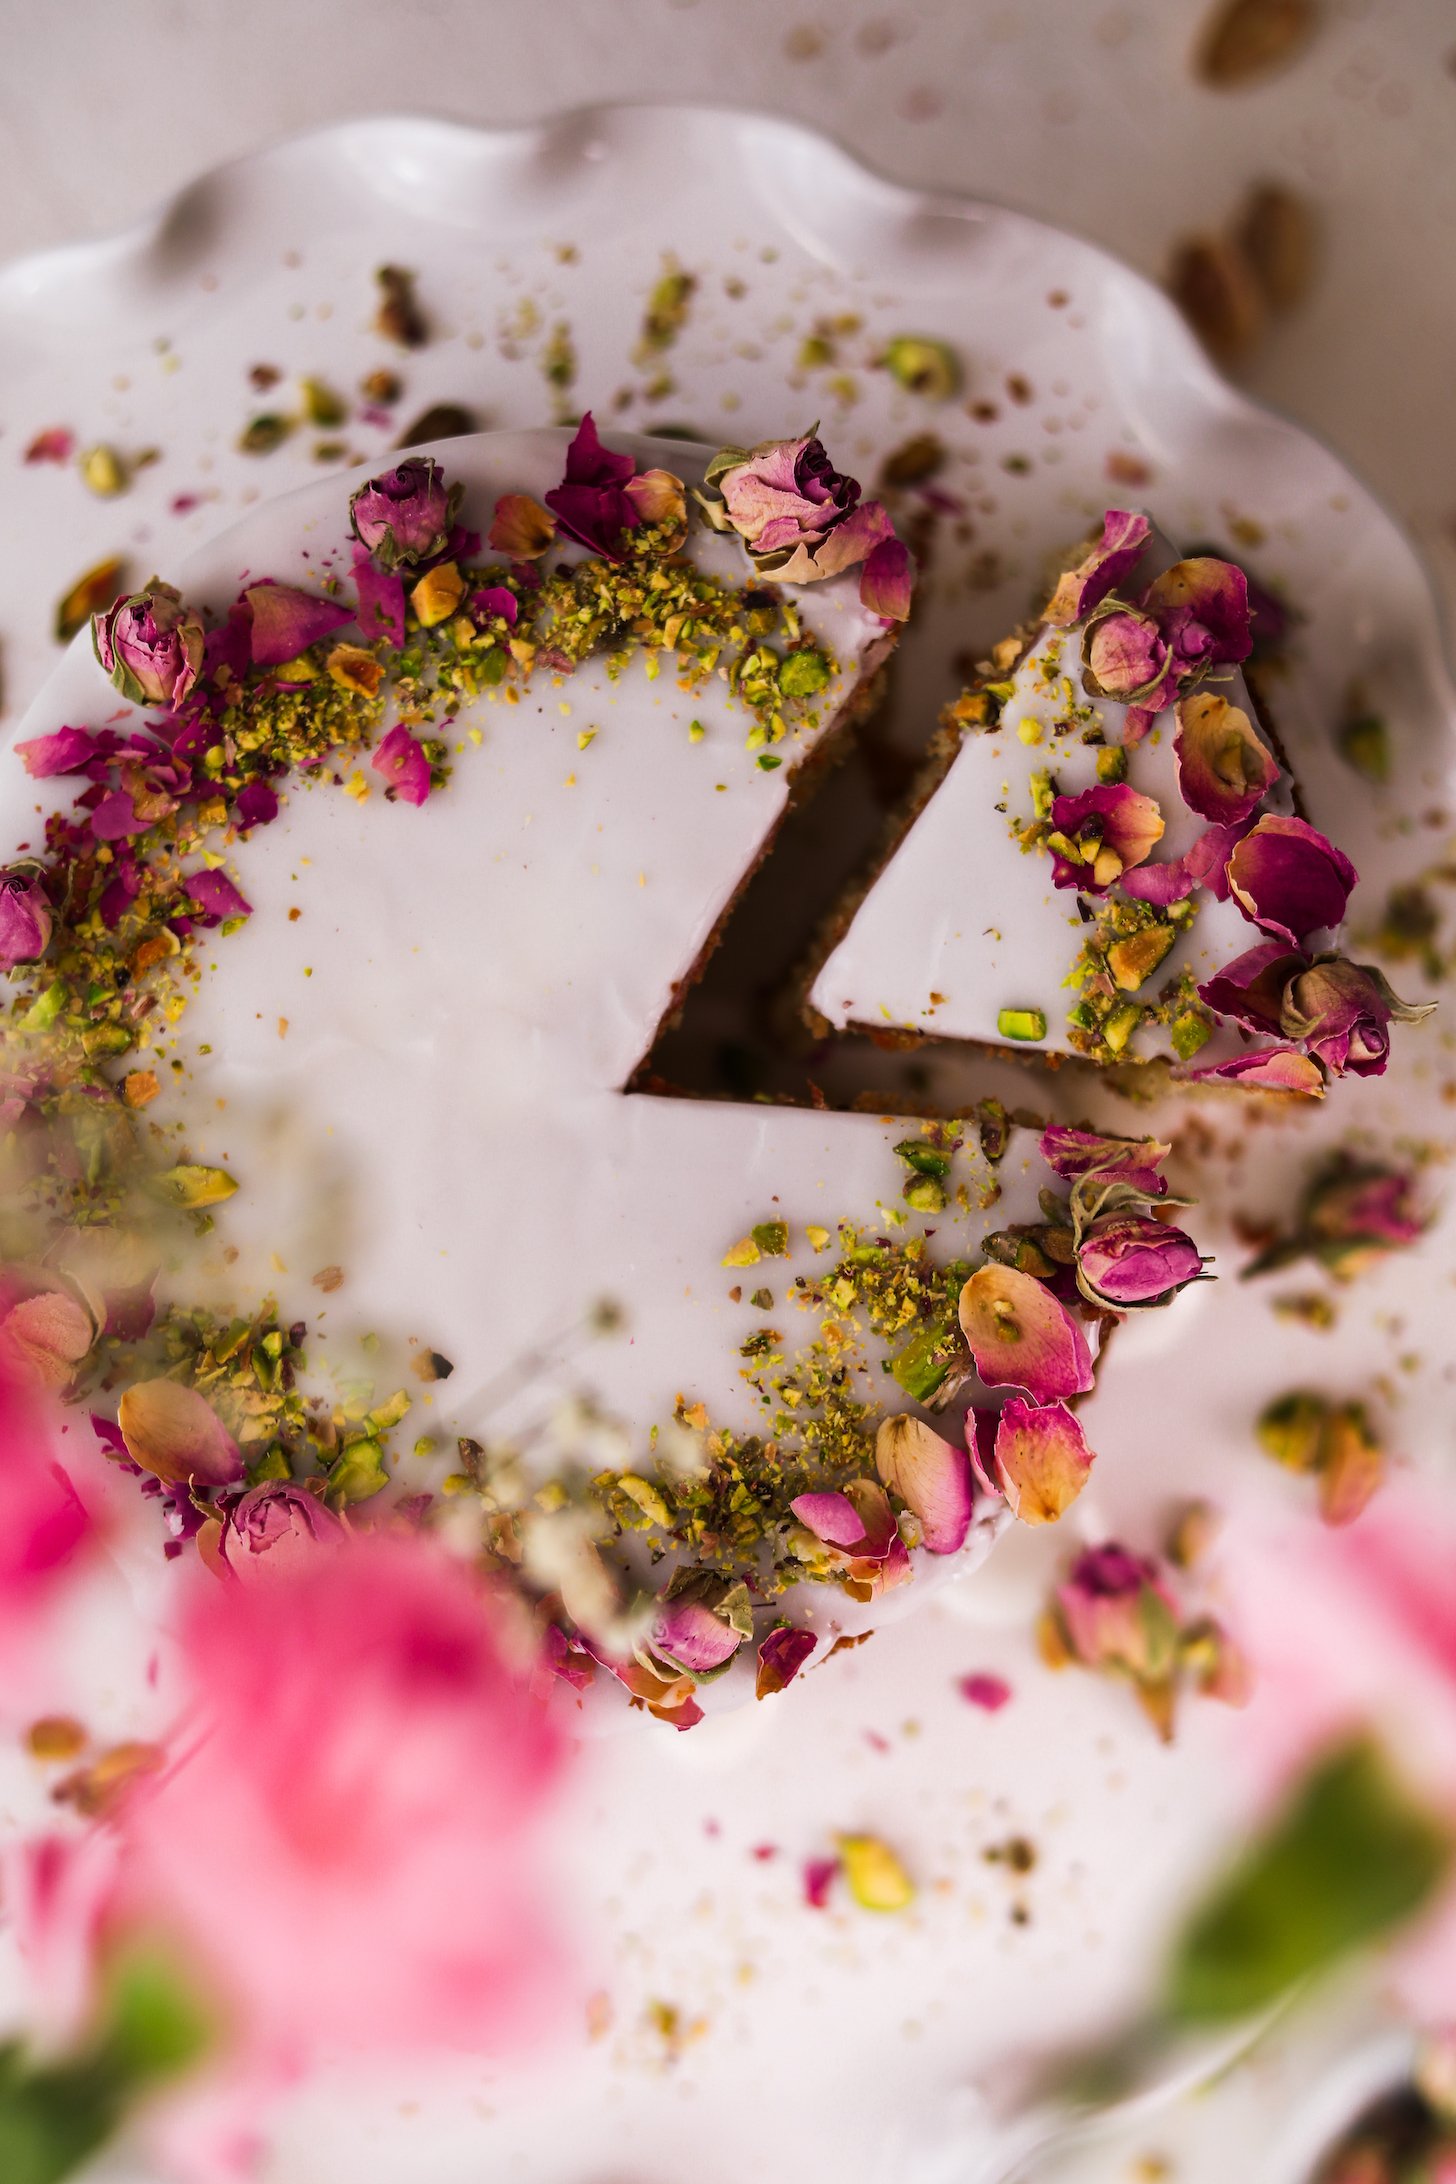 The top-down snapshot displays a cake on a cake stand. It's topped with white icing, dried roses, and crushed pistachios on top. A slice is pulled out.